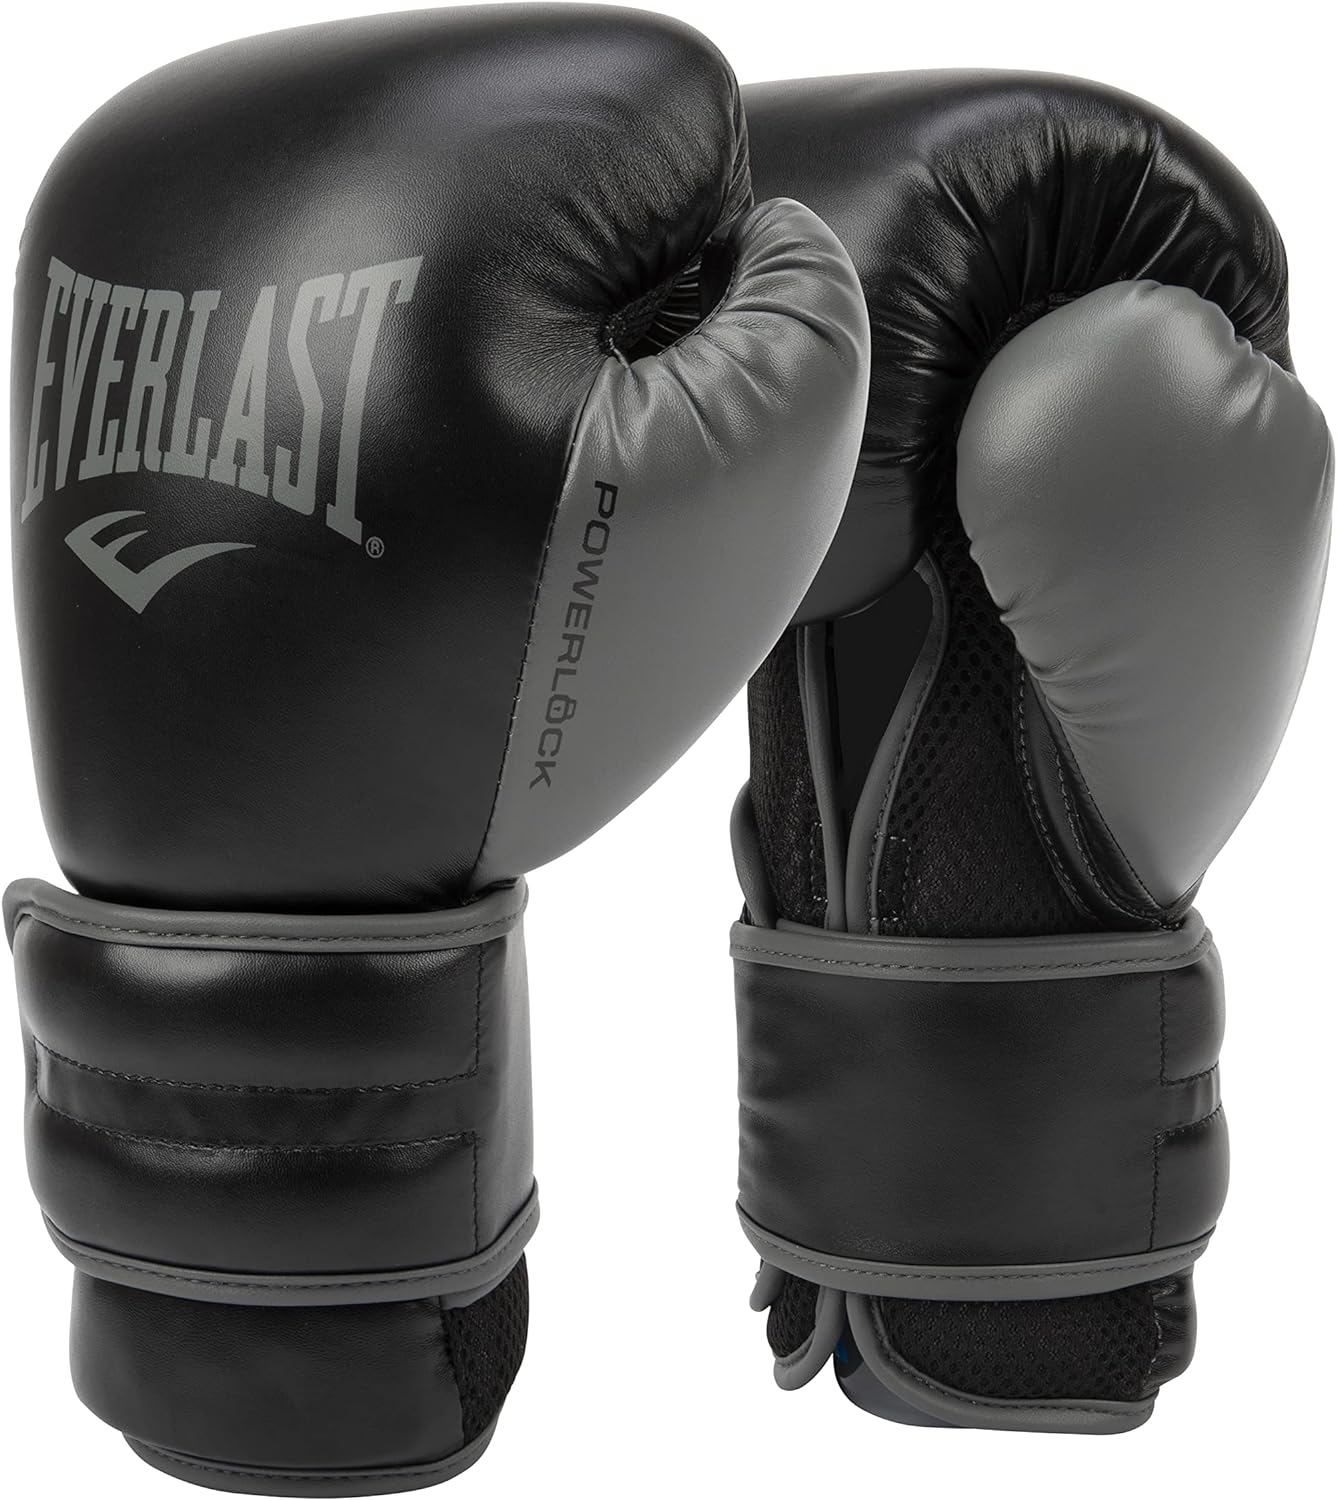 Best Boxing Glove: Top Picks for Superior Performance